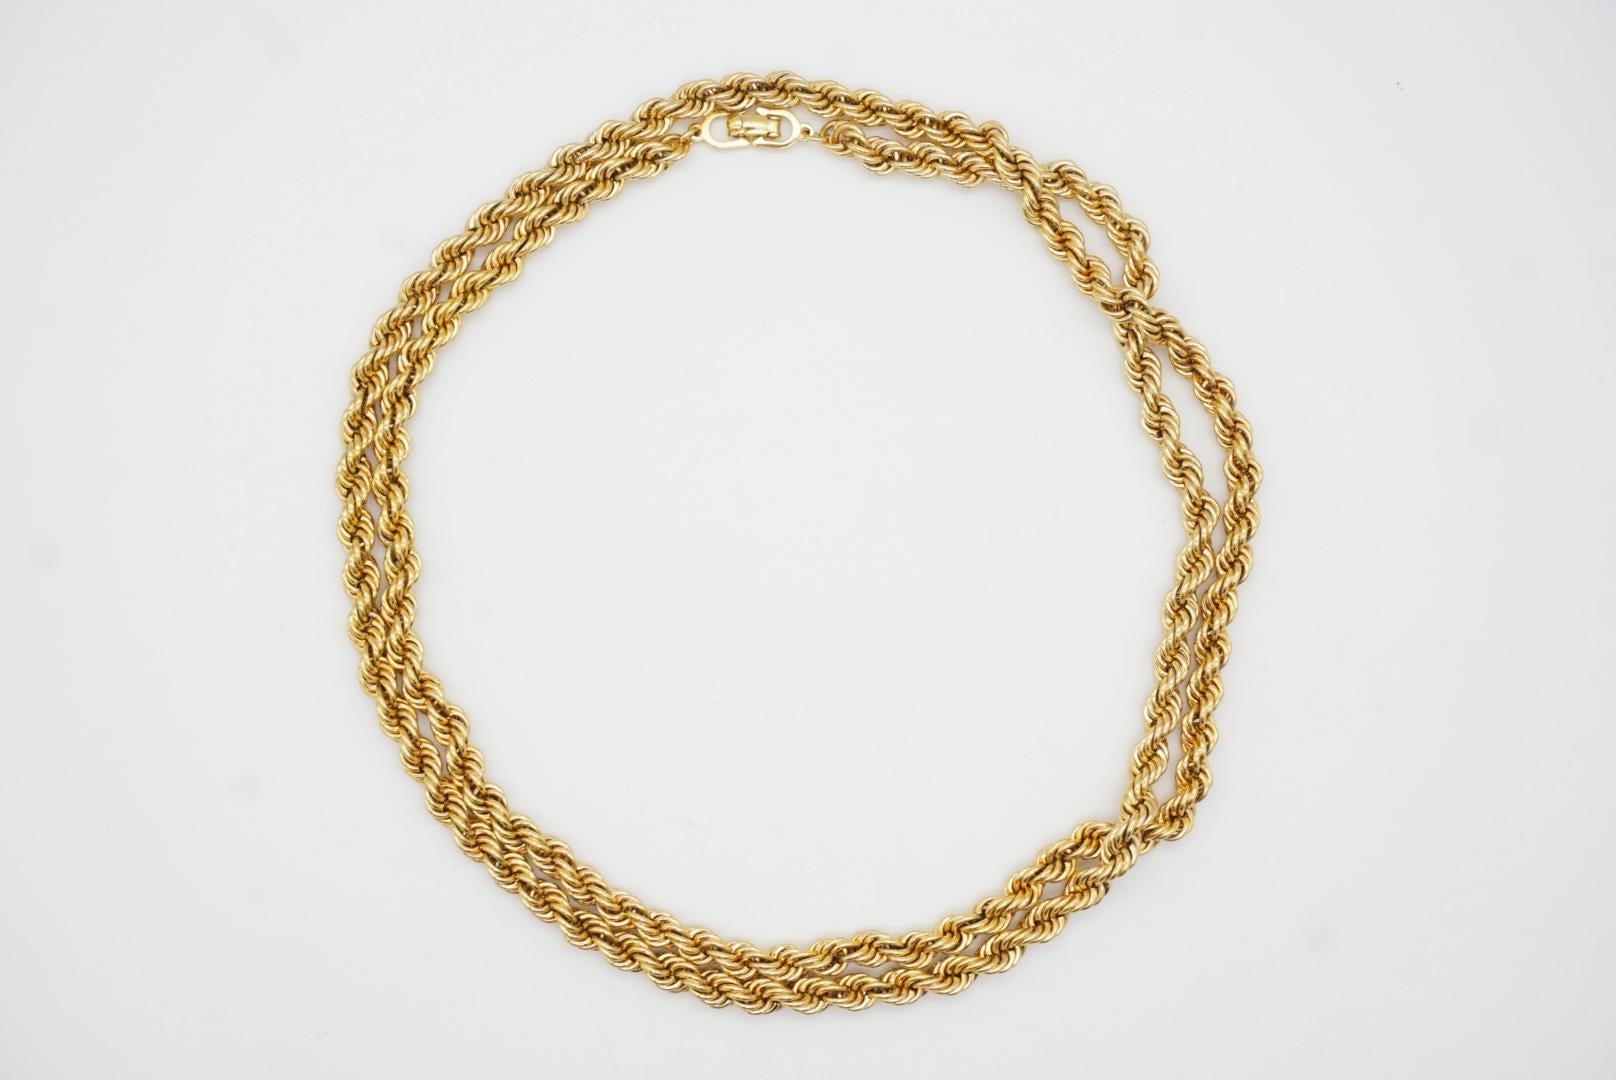 Christian Dior Vintage 1980s Versatile Twist Rope Chain Gold Long Necklace For Sale 6